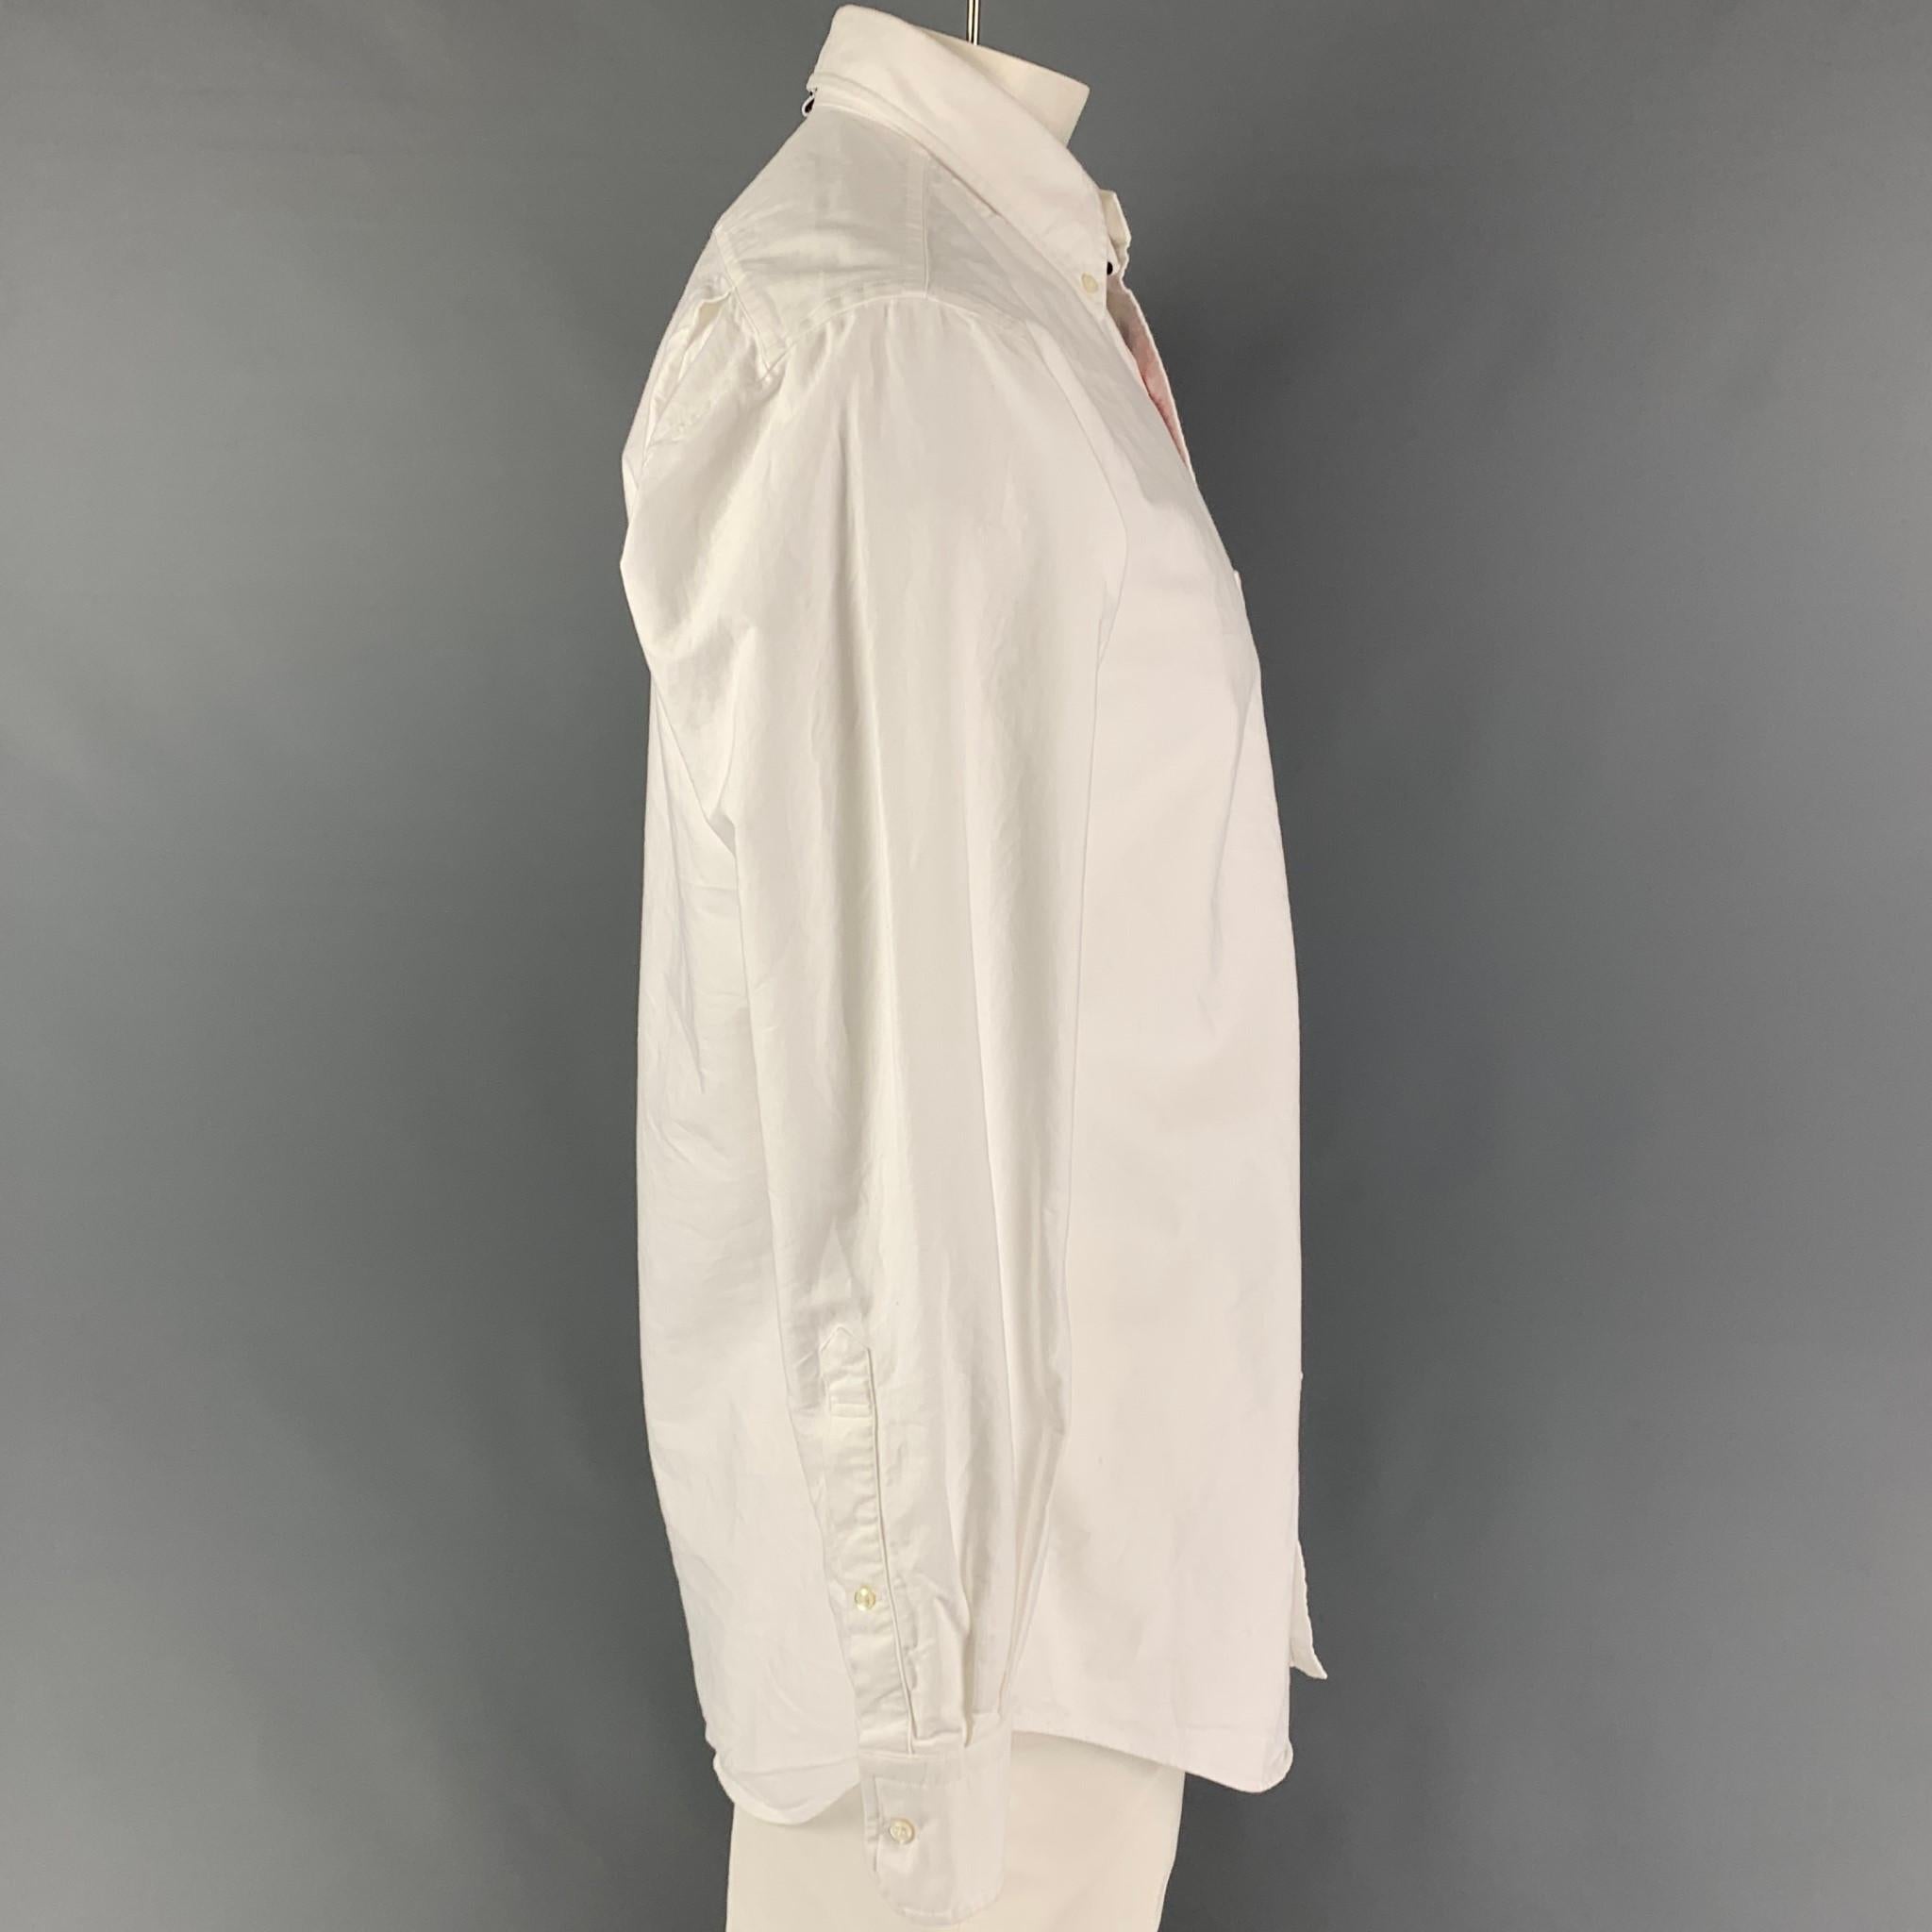 THOM BROWNE long sleeve shirt comes in white cotton featuring a striped trim, button down collar, patch pocket, and a button up closure. Made in Italy.

Good Pre-Owned Condition. Moderate discoloration at front. As-Is.
Marked: